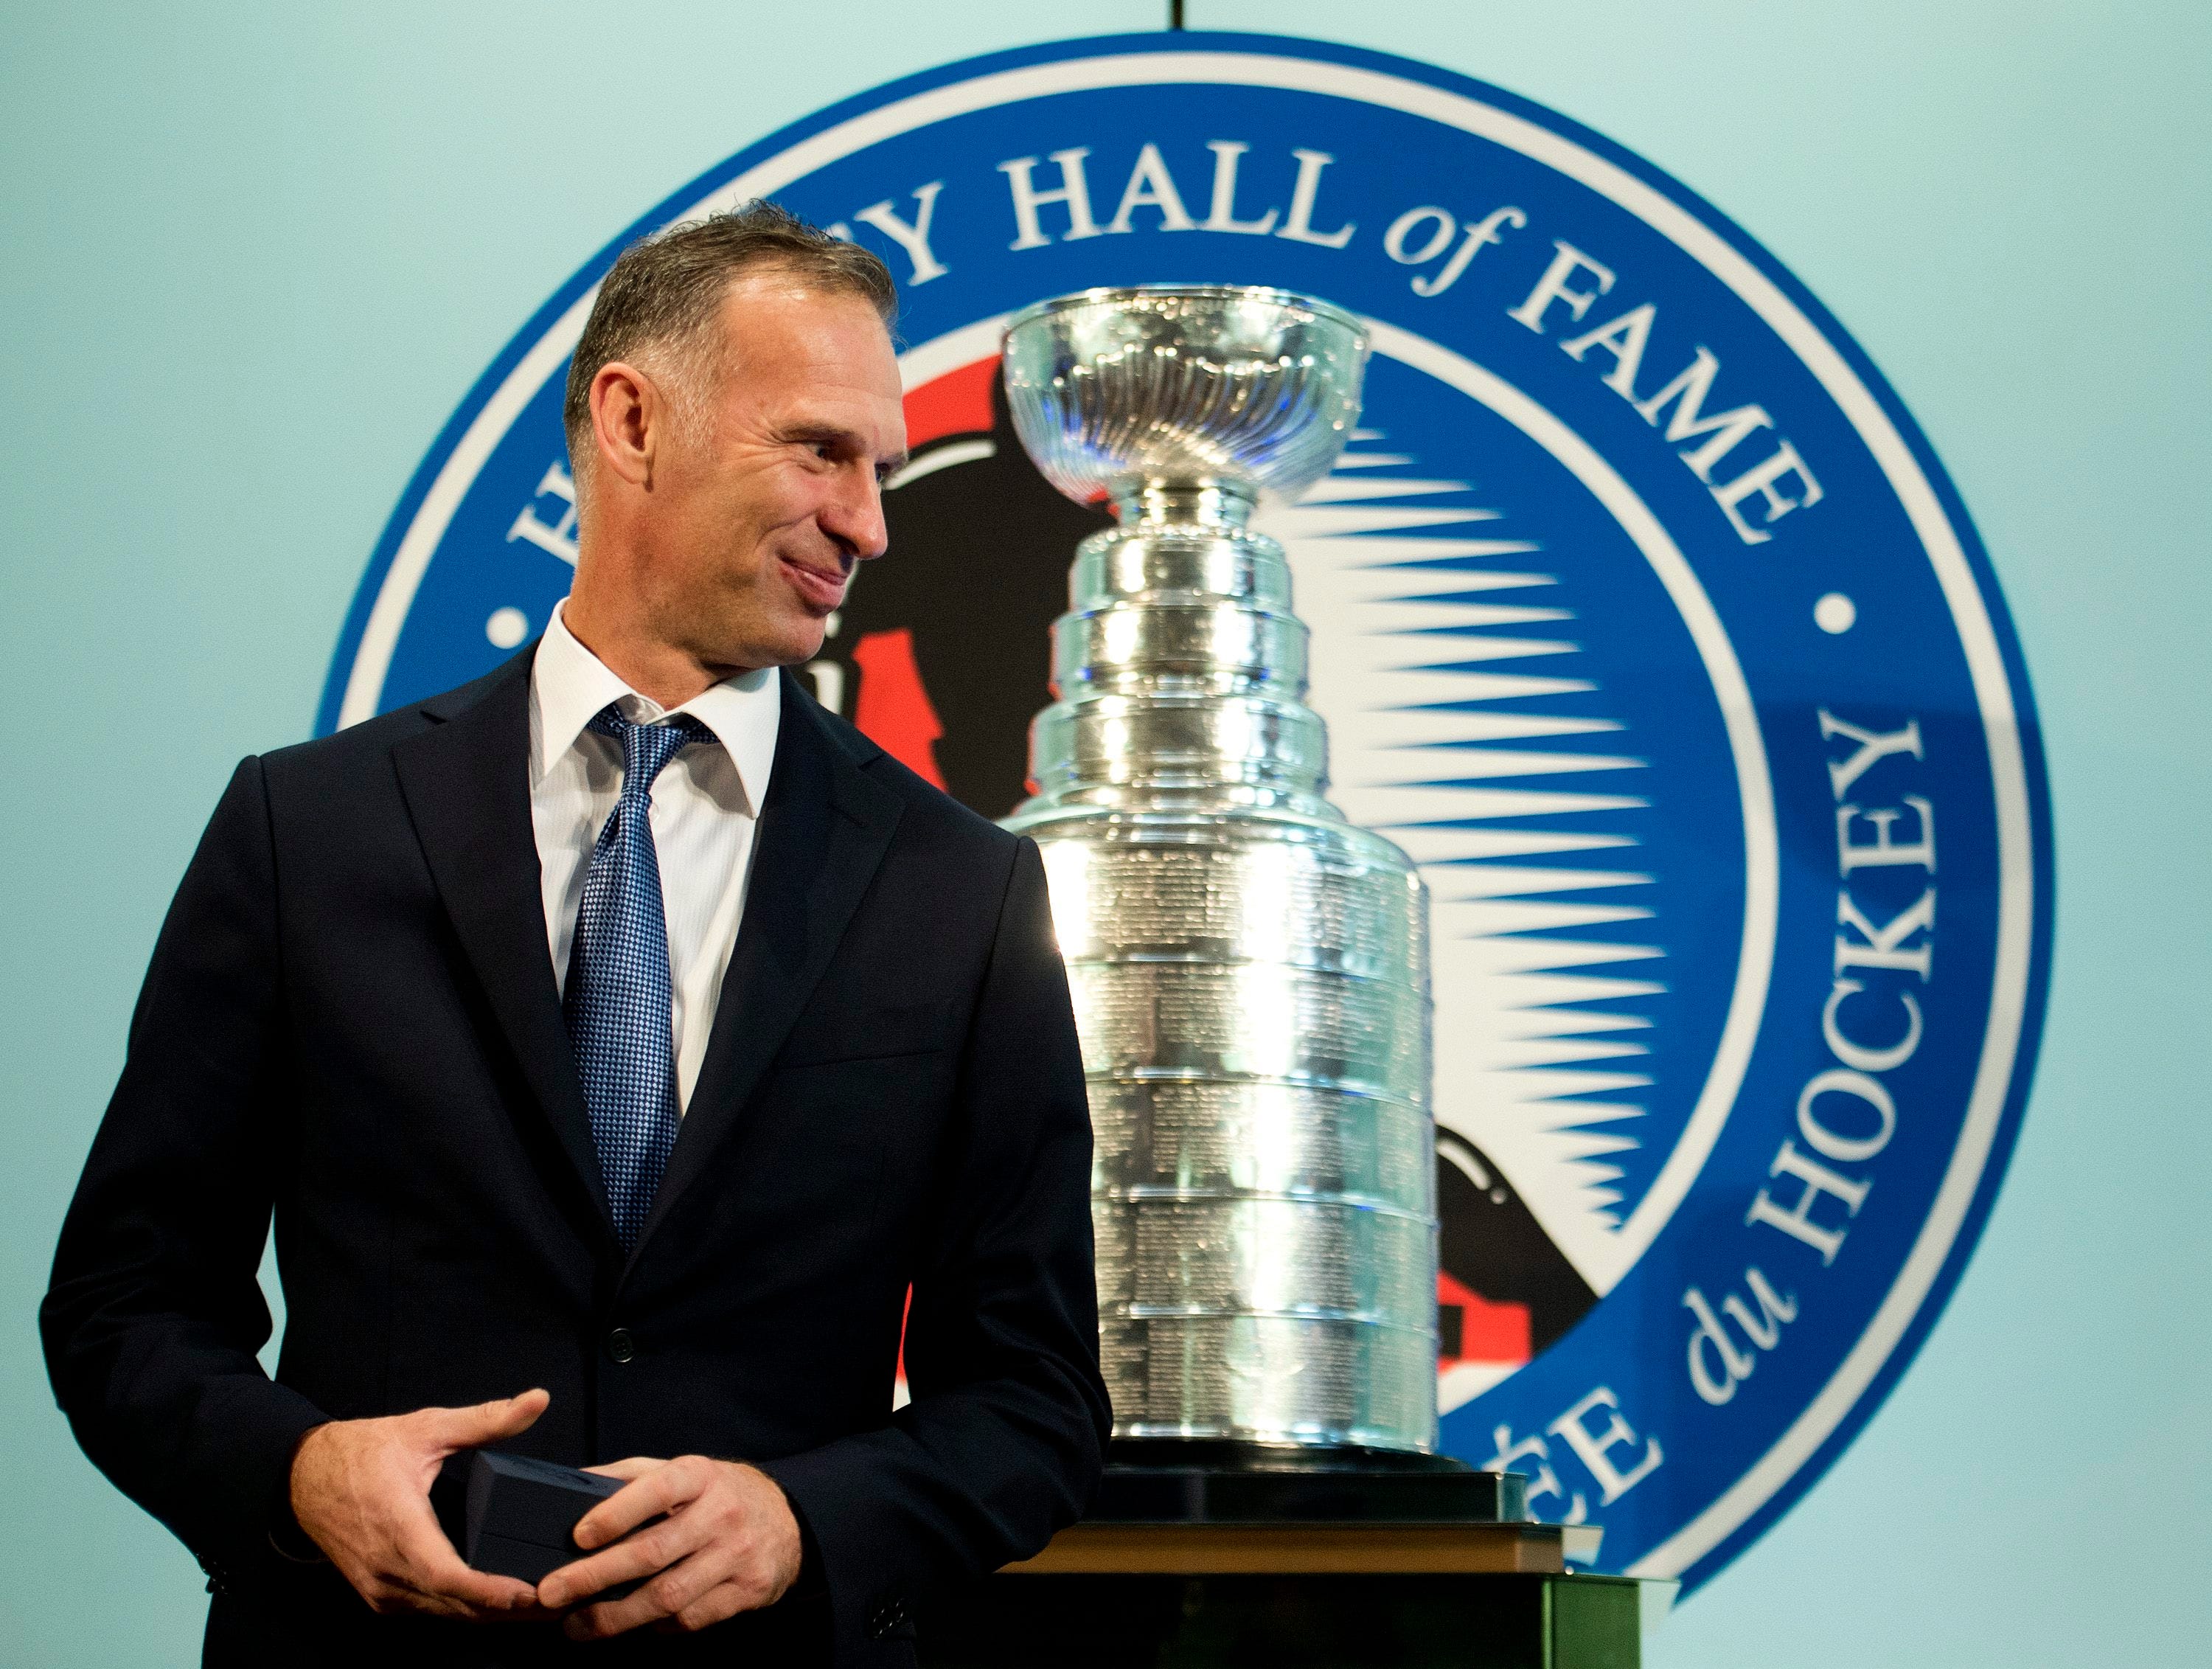 Dominik Hasek calls Alex Ovechkin a 'chicken (expletive),' wants NHL to suspend all Russians